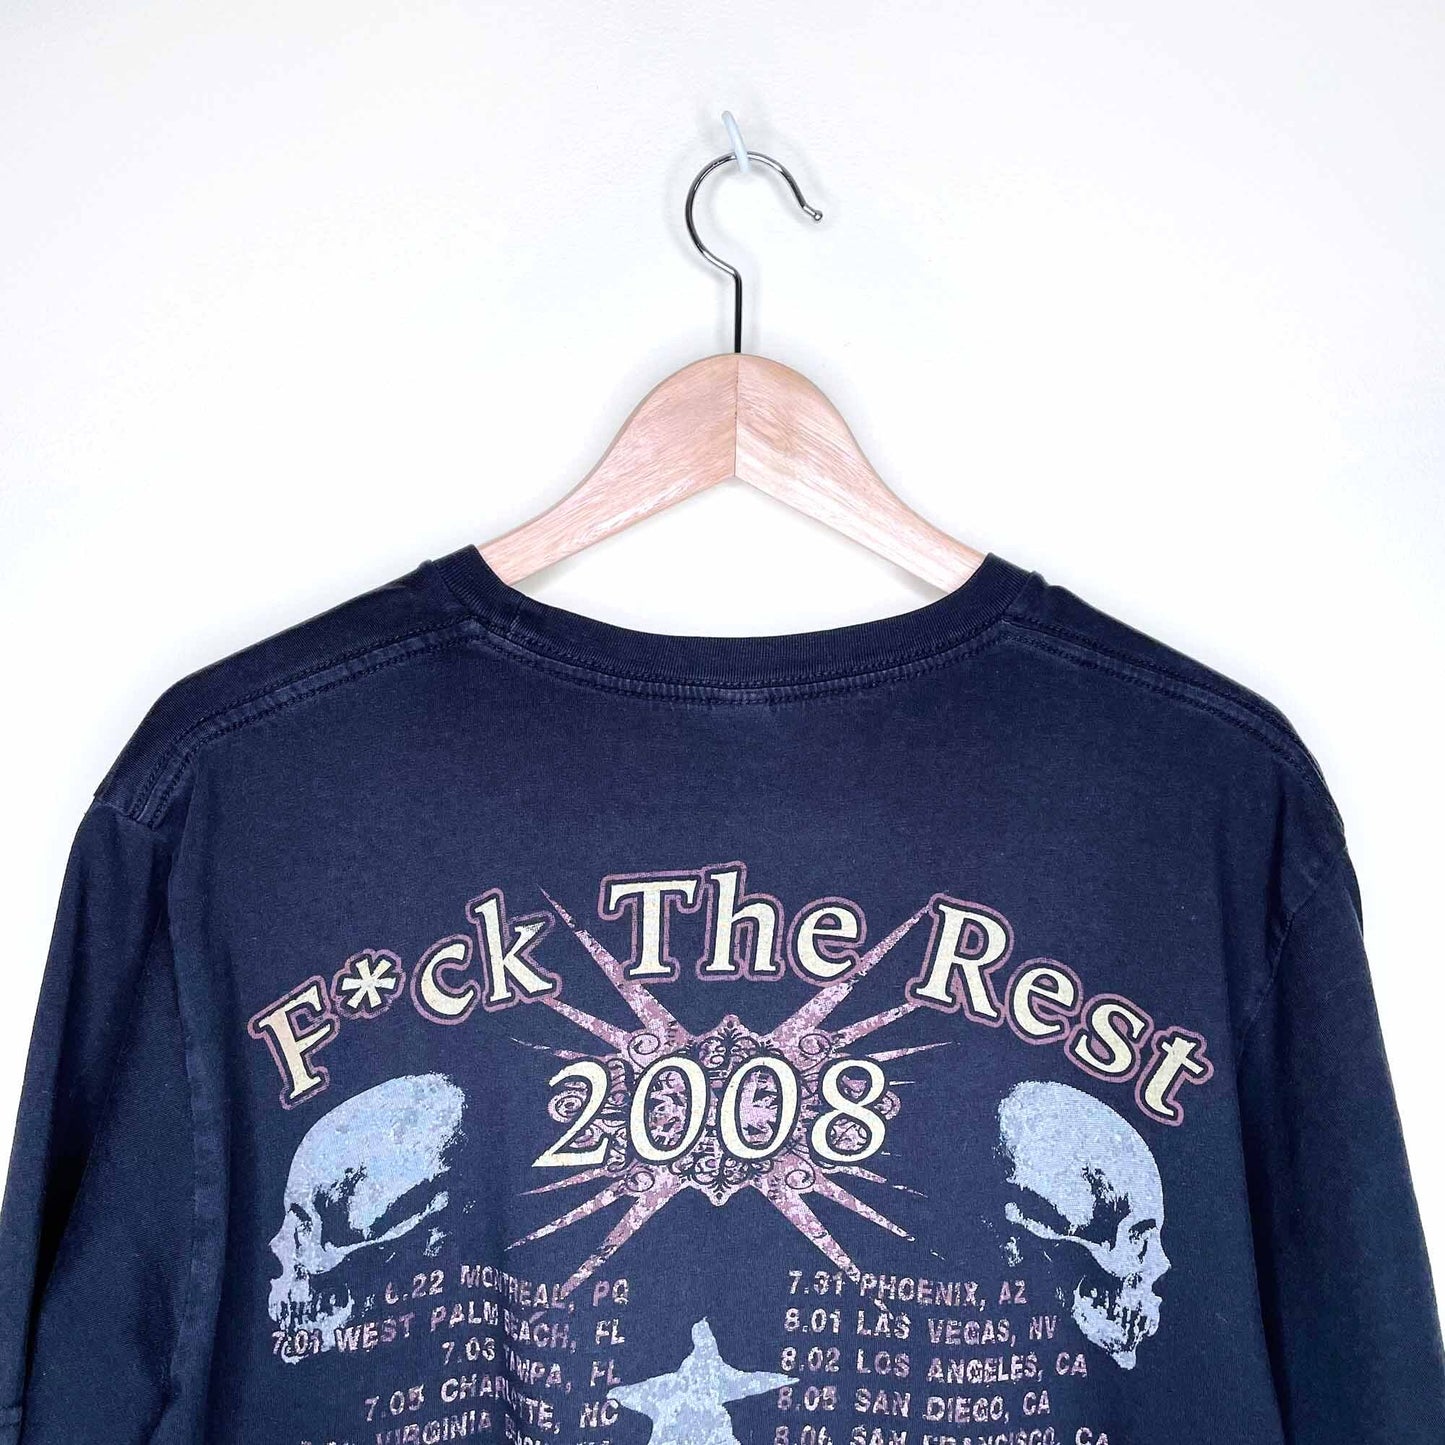 motley crue 2008 f*ck the rest tour band tee - size large